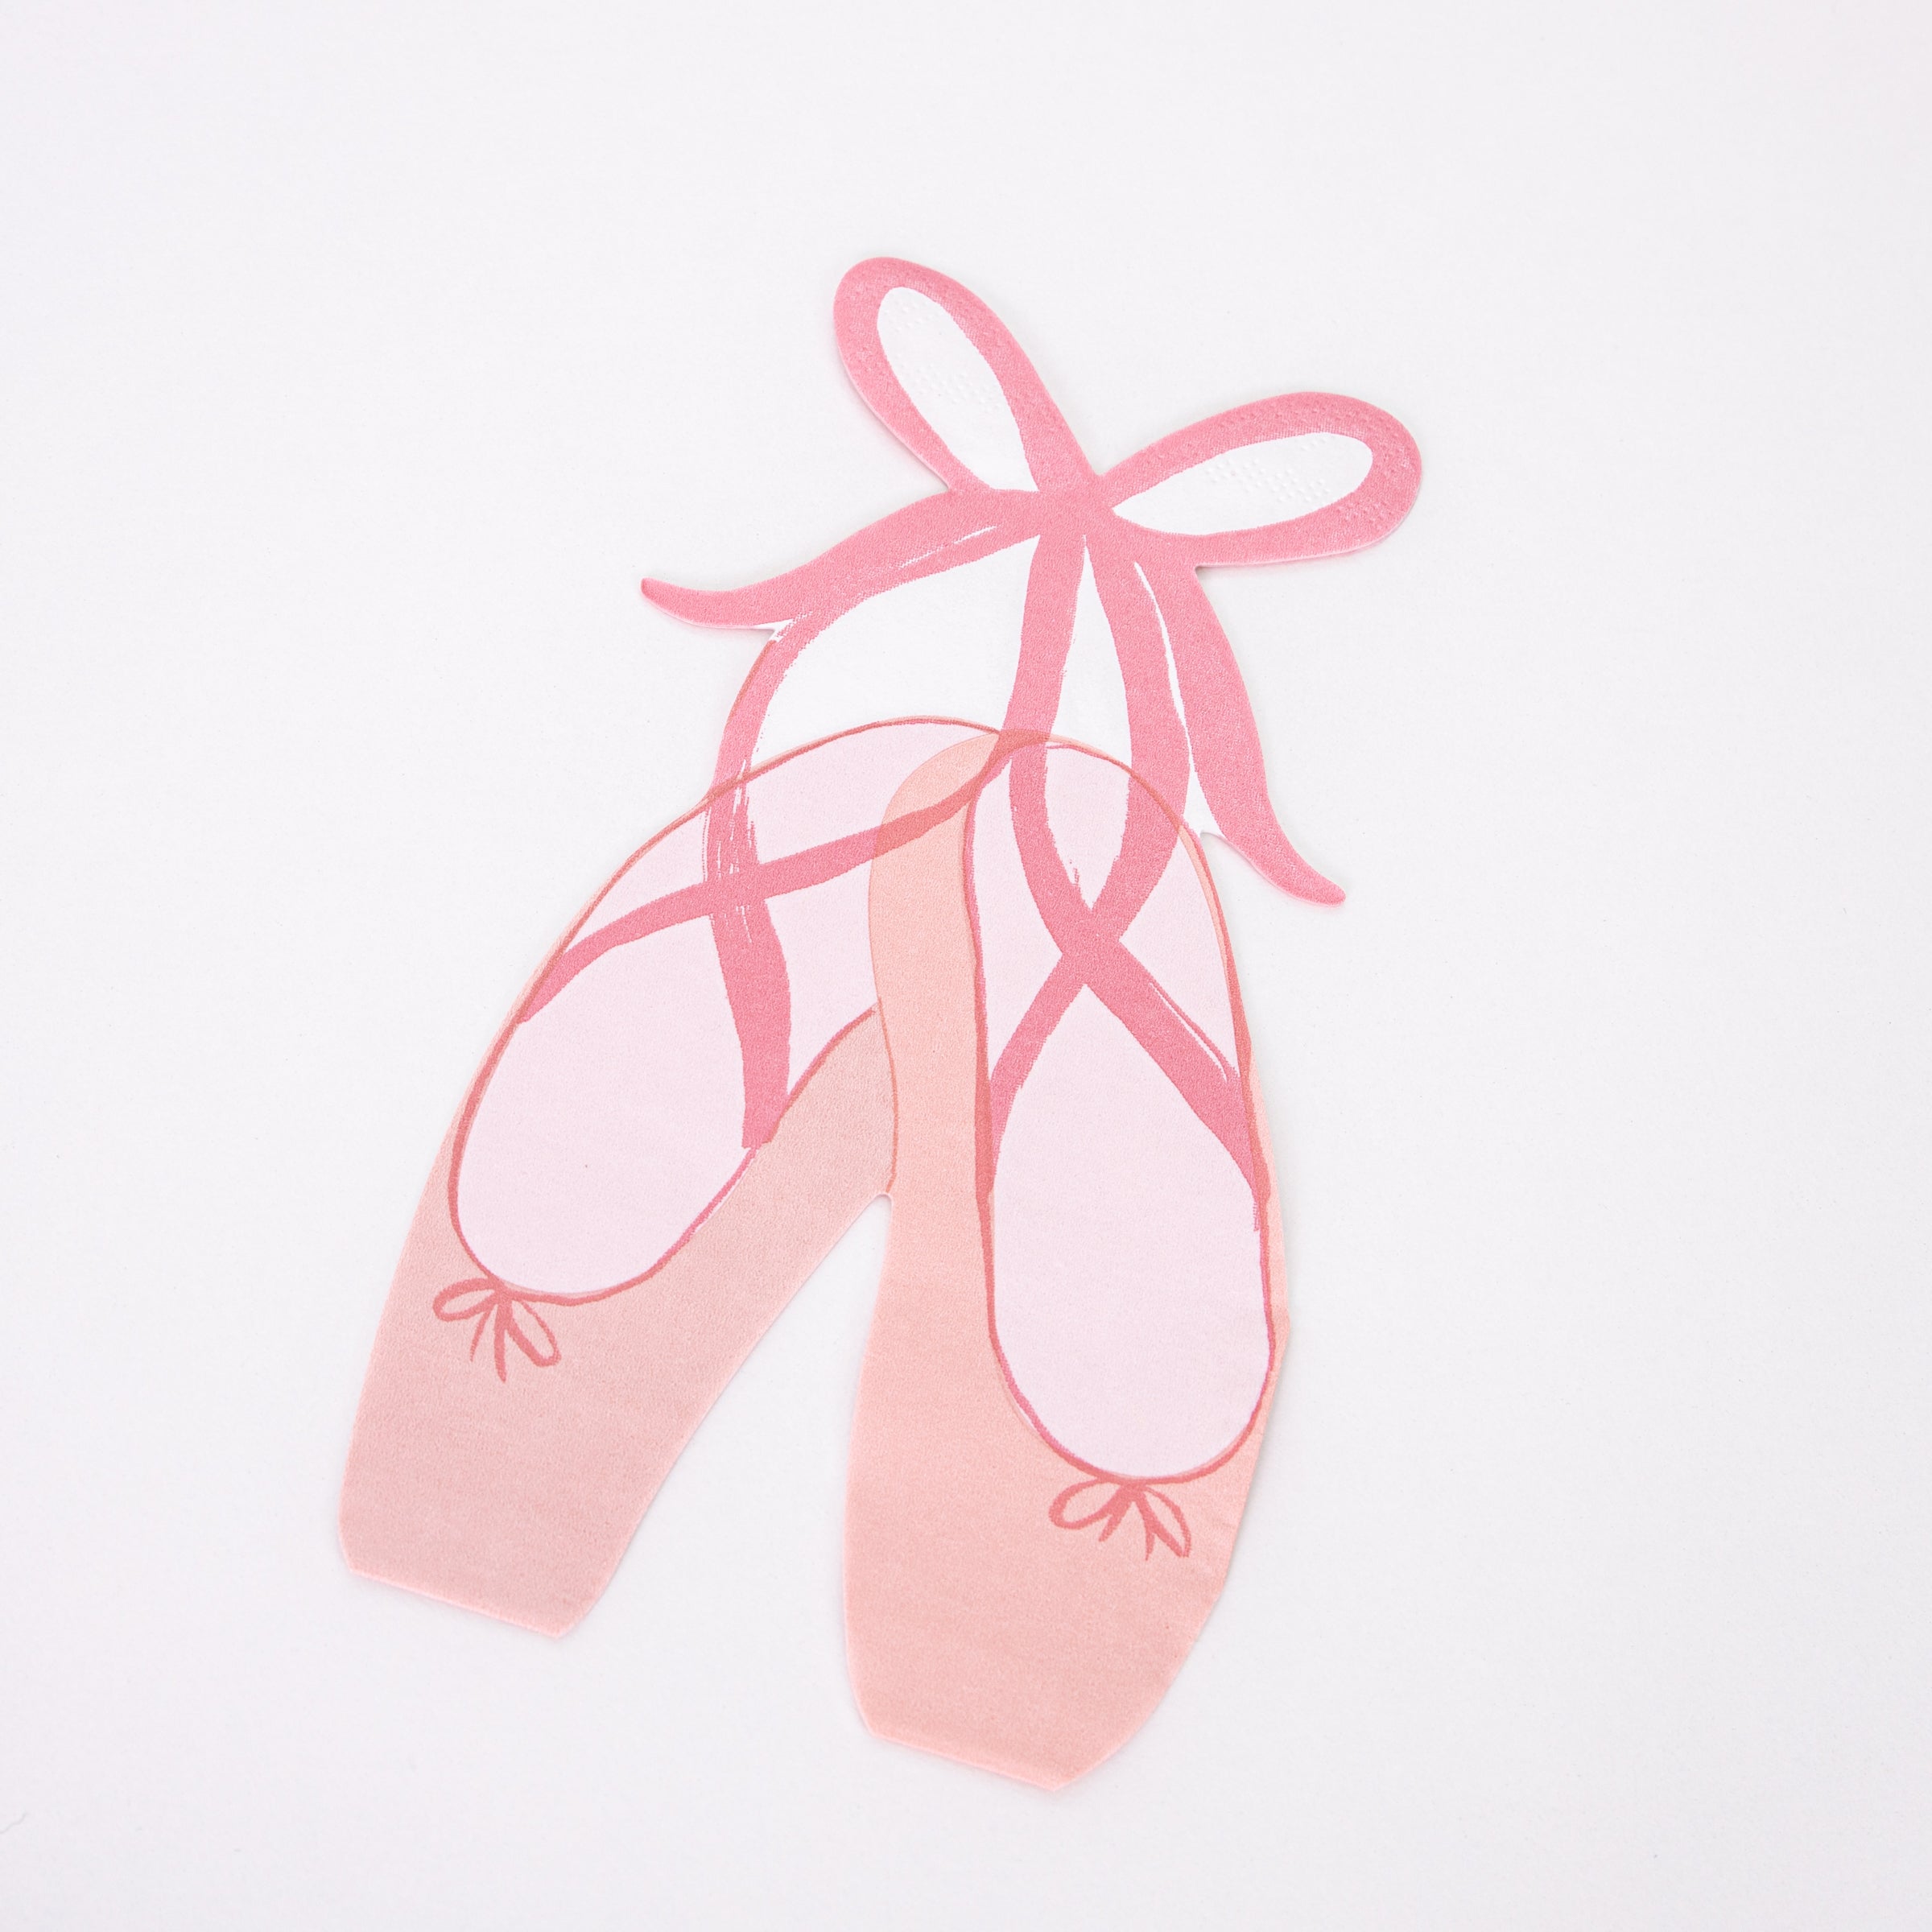 Our party napkins, in the shape of ballet slippers, are perfect to add to your ballerina party supplies.